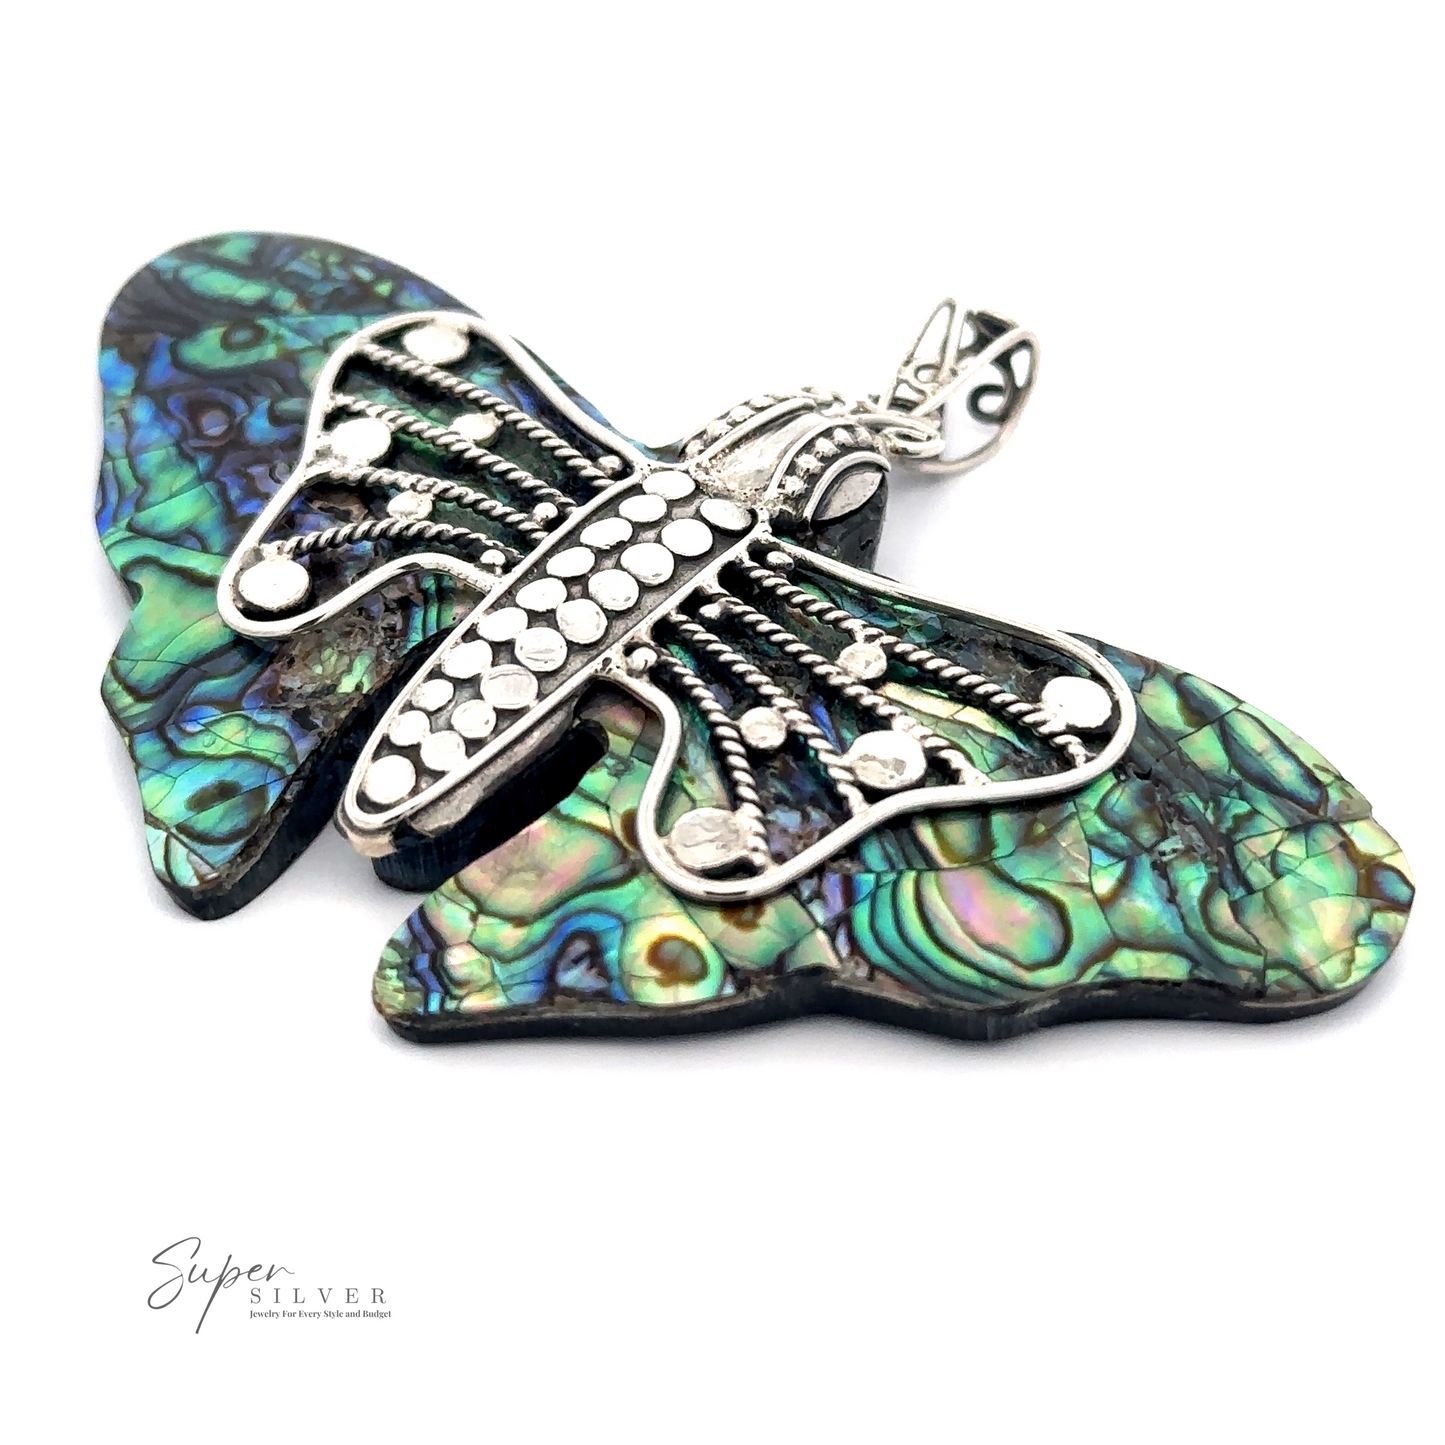 A Large Abalone Butterfly Pendant with intricate silver detailing and vibrant, multicolored wings made of abalone shell is set against a plain white background. Text in the image reads "Super Silver." This exquisite piece of abalone jewelry is not only stunning but also believed to have healing properties.